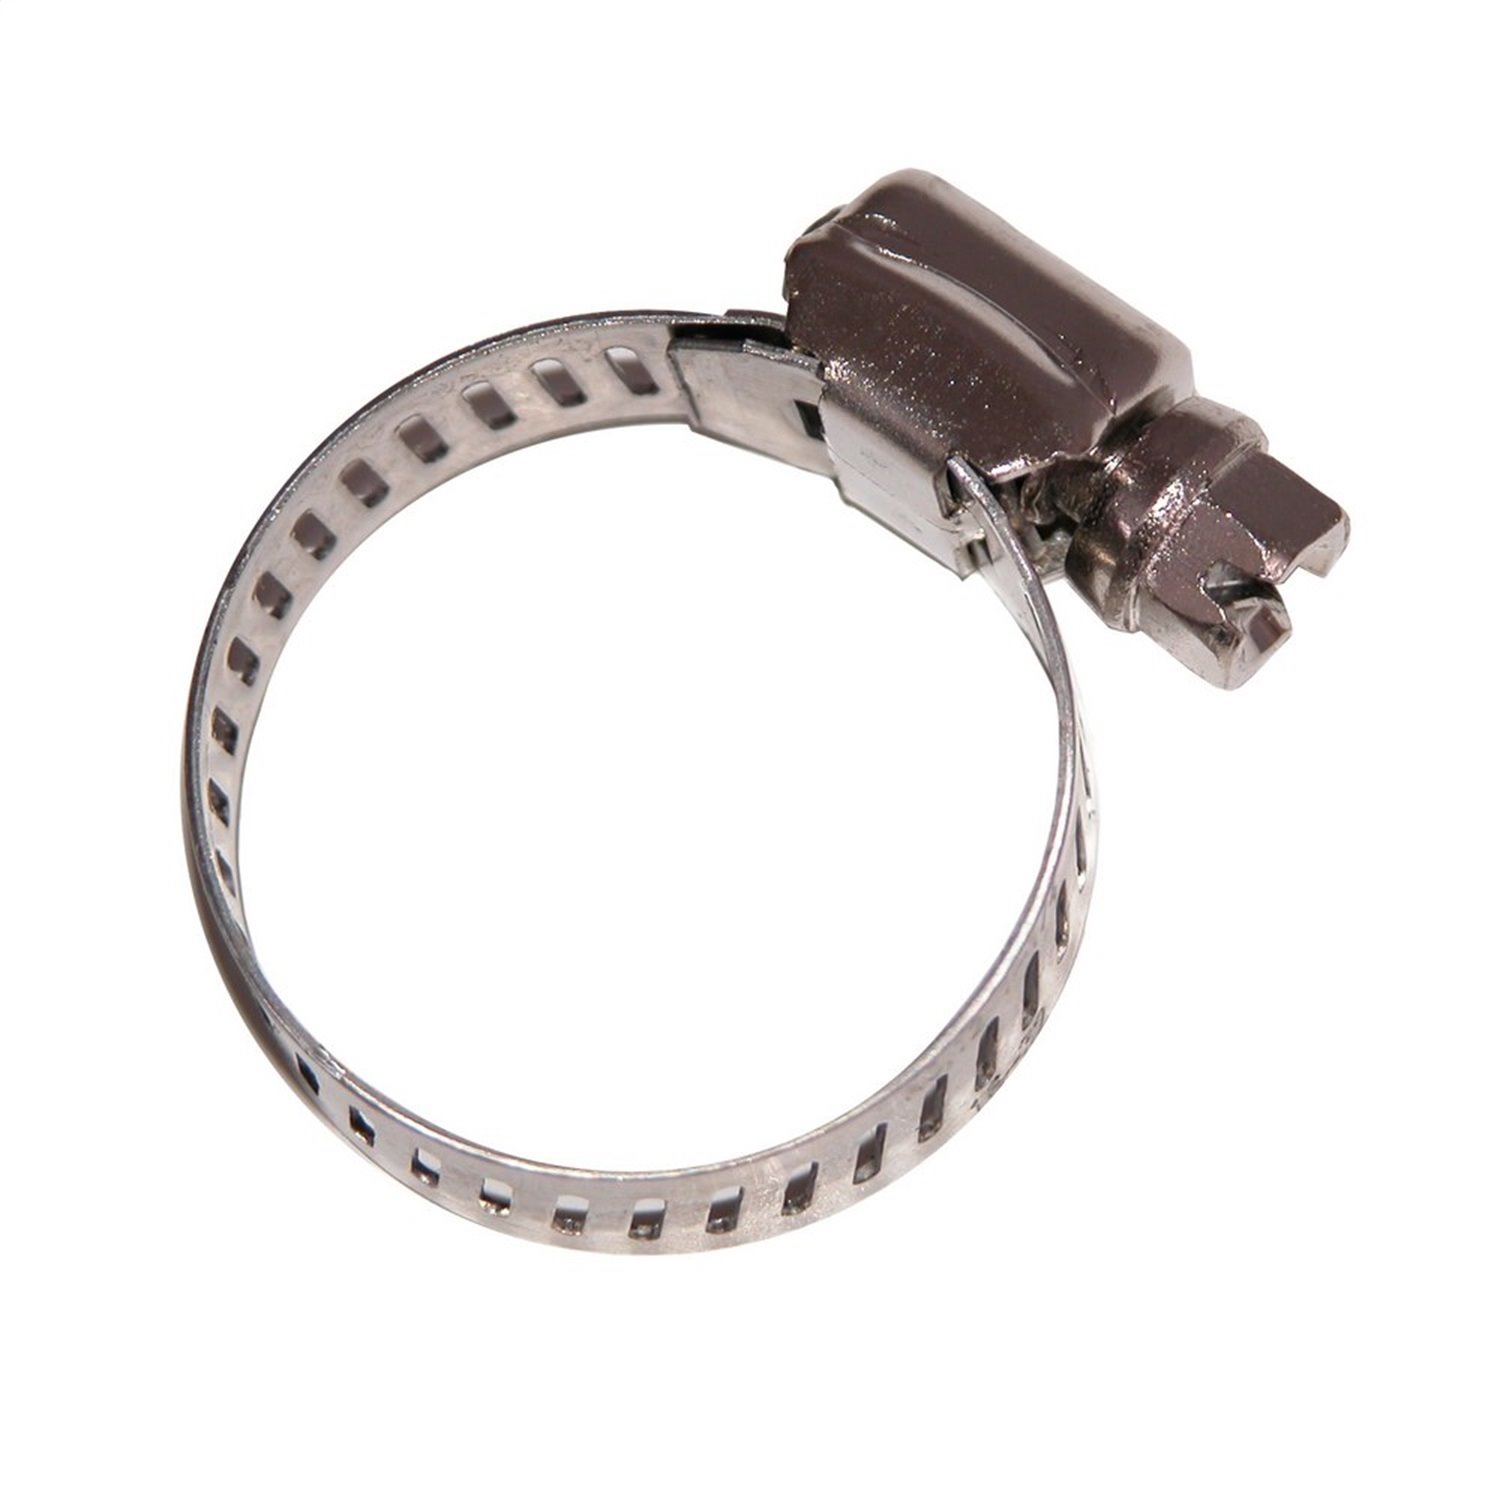 Hose Clamp 1-1/4 Inch By Omix-ADA